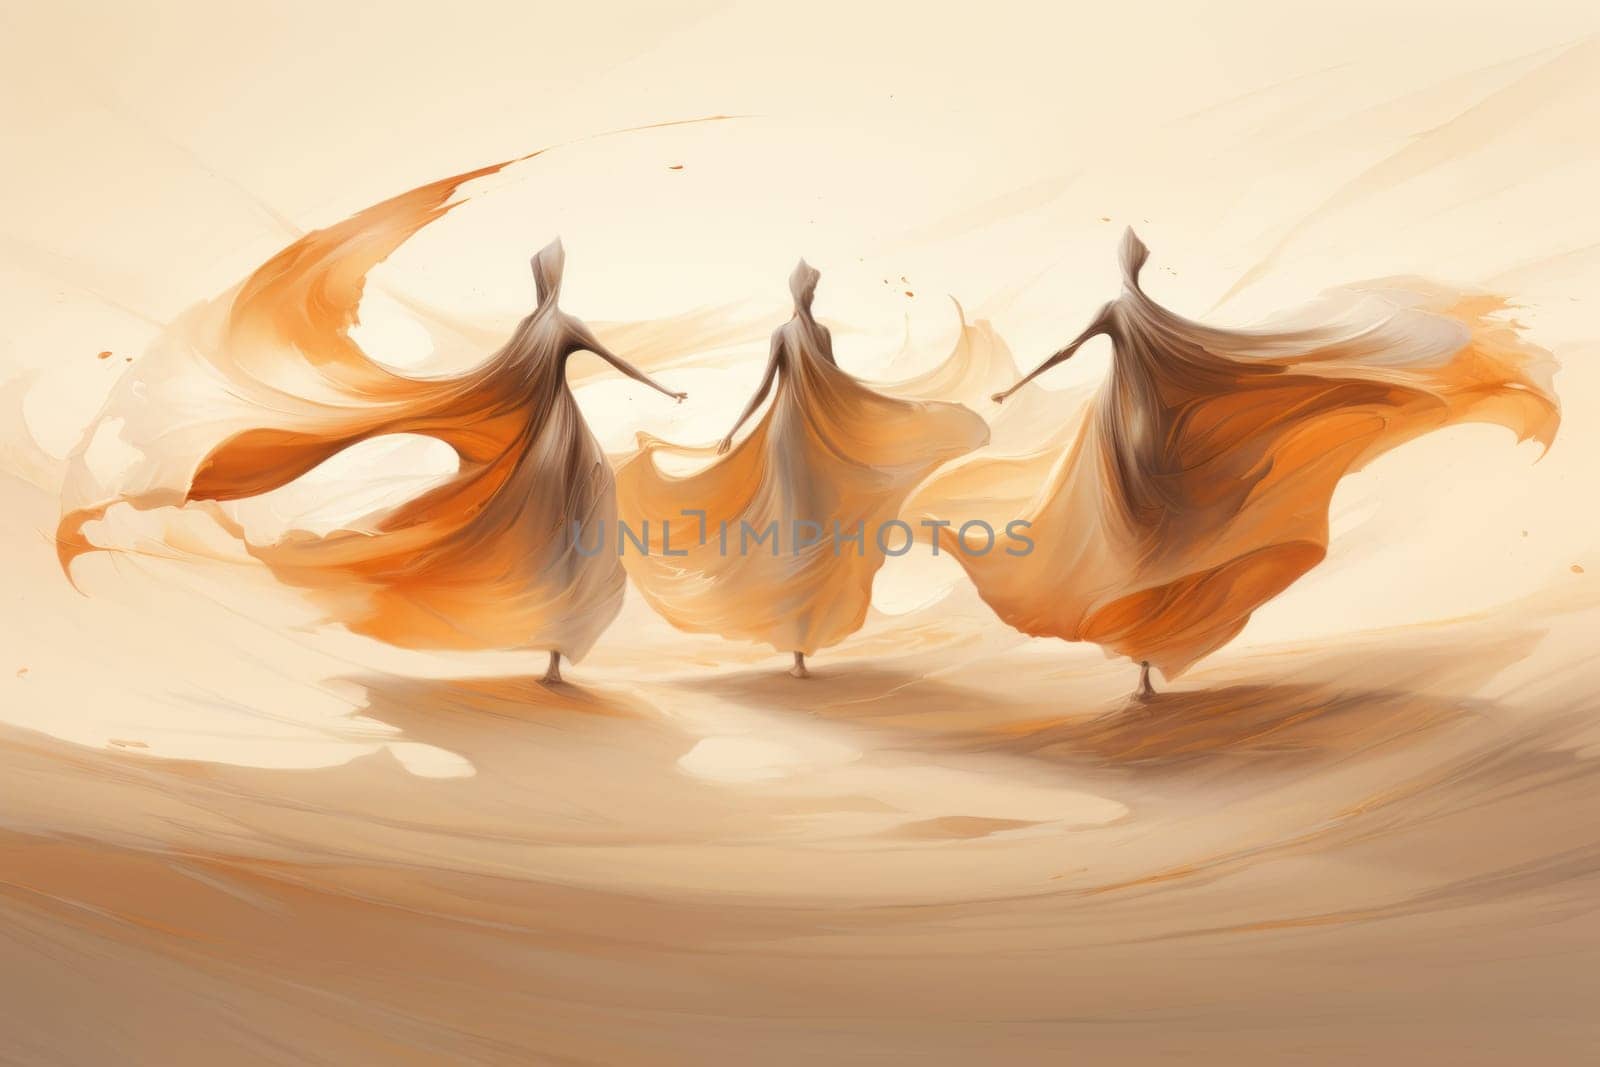 In the enchanting world of fantasy, there exist mystical beings known as whirling sand dervishes.